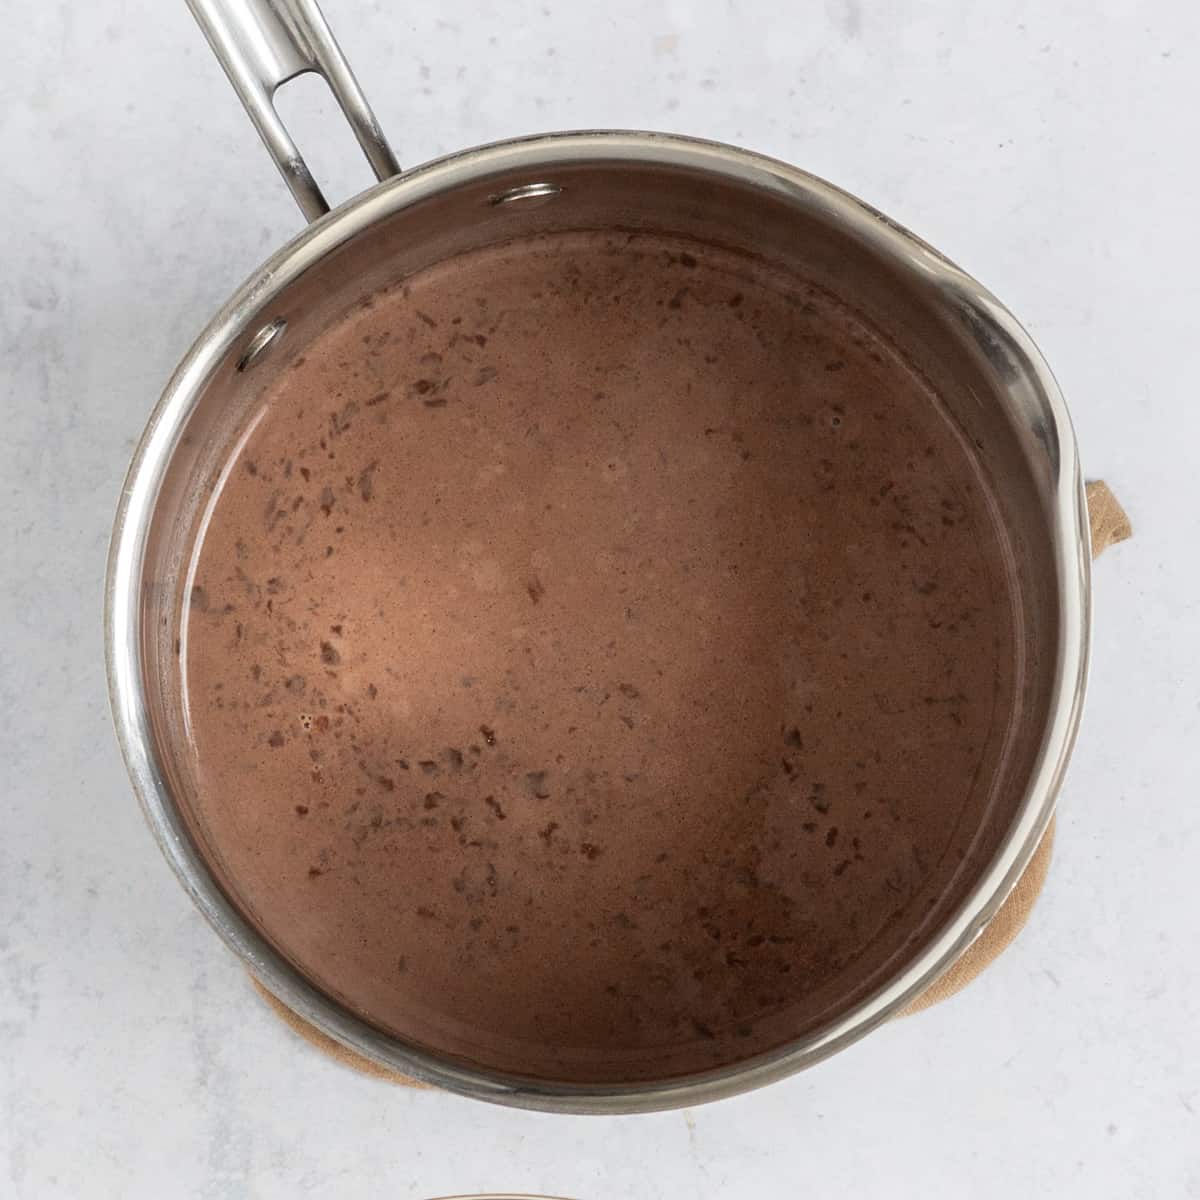 the chocolate, heavy cream, and milk combined in a small saucepan